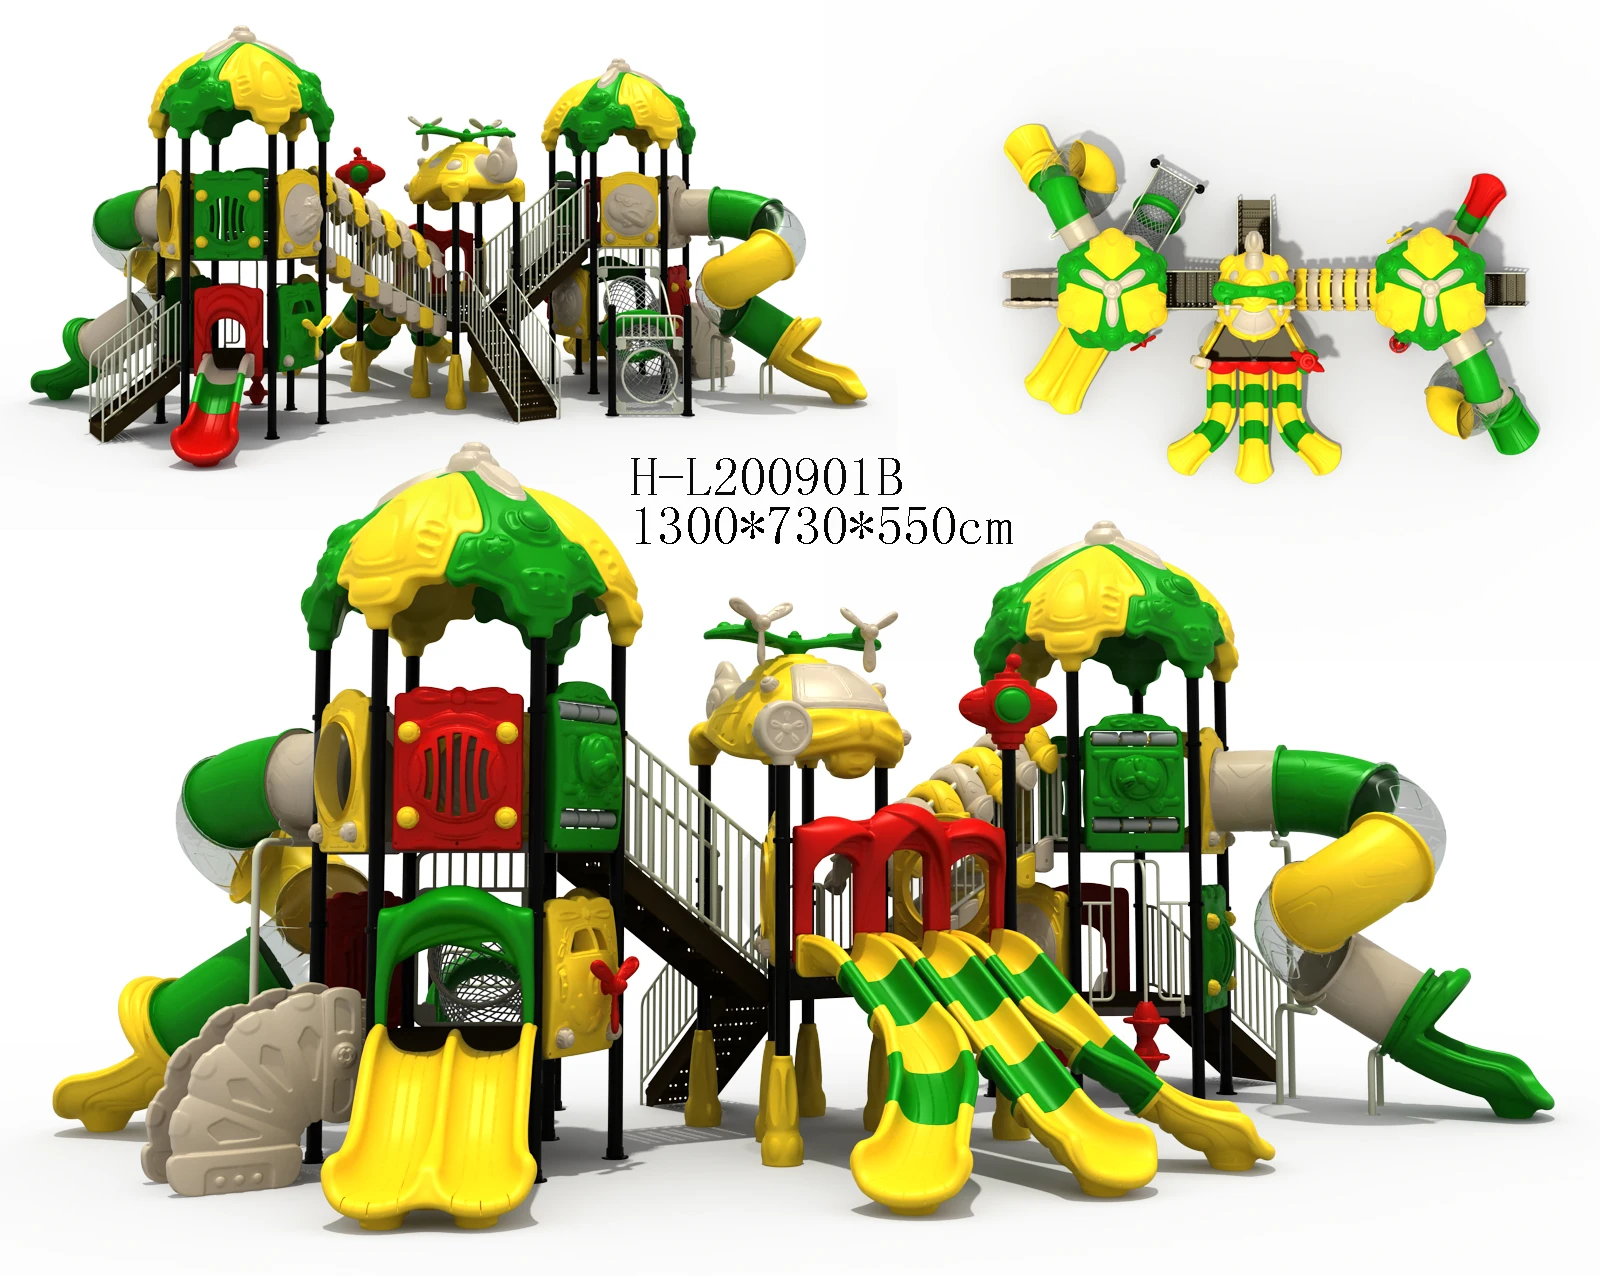 

Amusement adventure park design Children multi play Equipment Kids Outdoor Playground wholesale price for commercial use, Any color